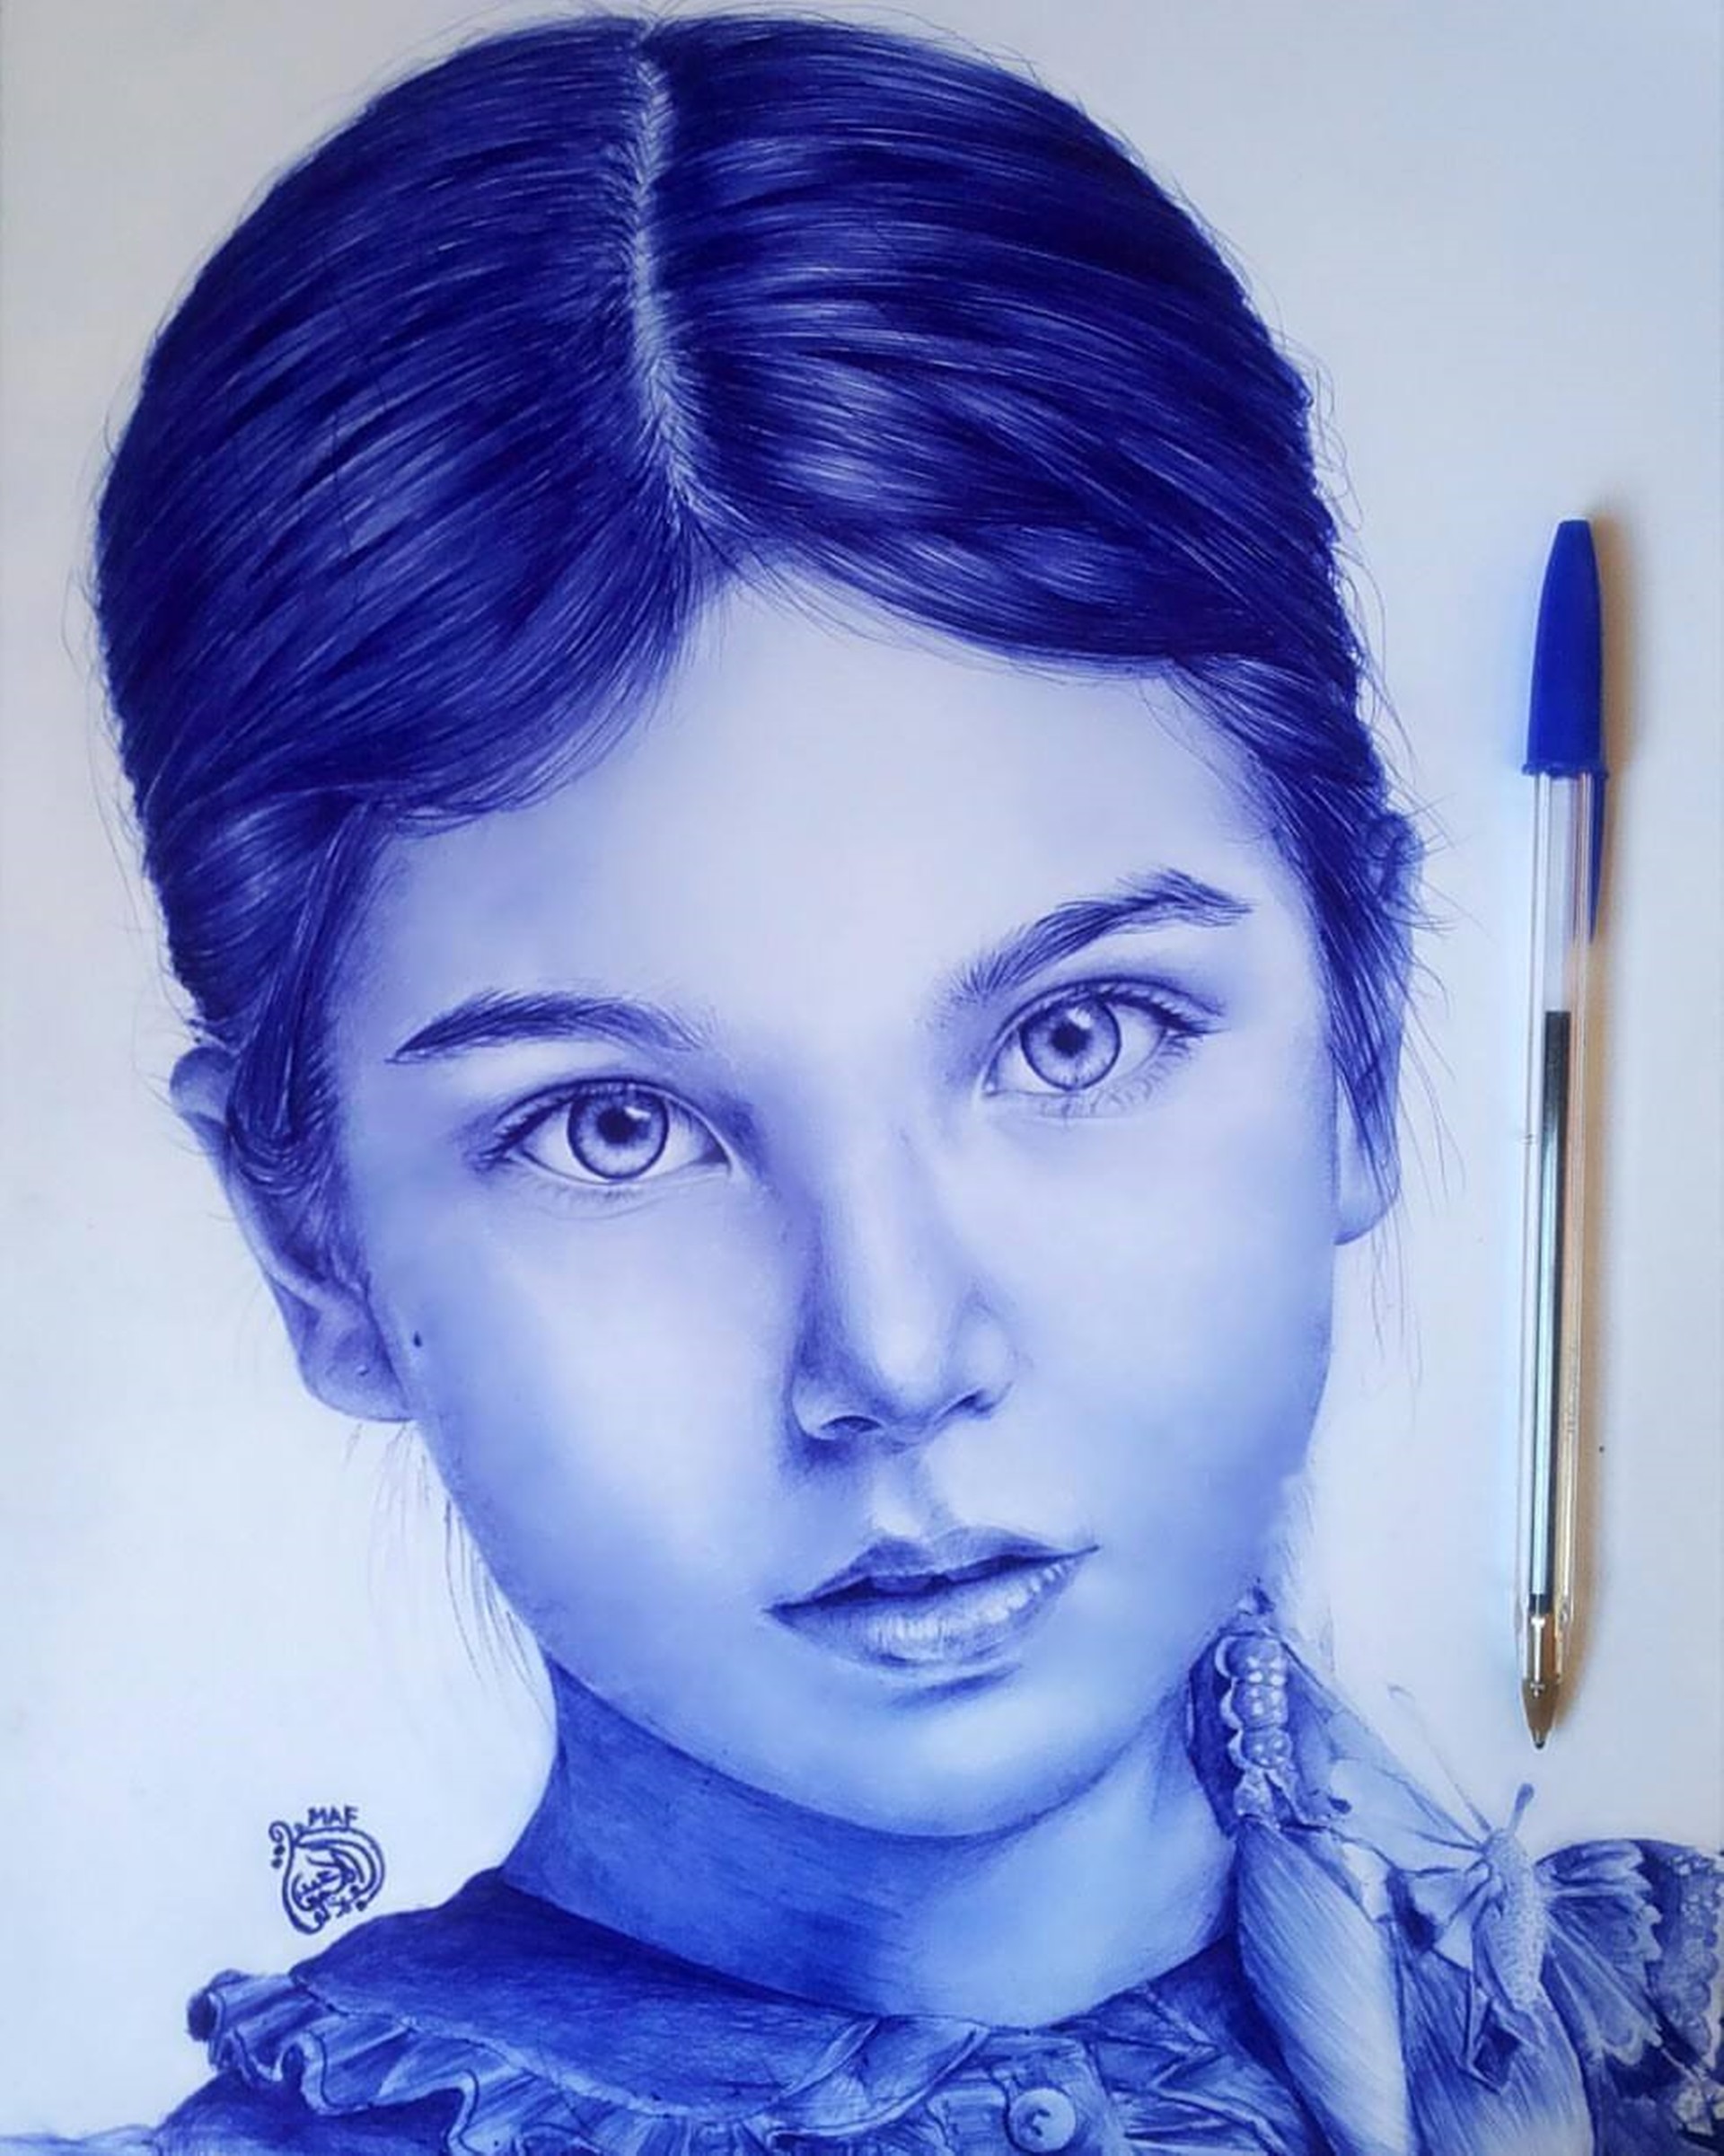 Blue pen drawing by a syrian artist | Ballpoint pen art, Ink pen drawings,  Pen art drawings